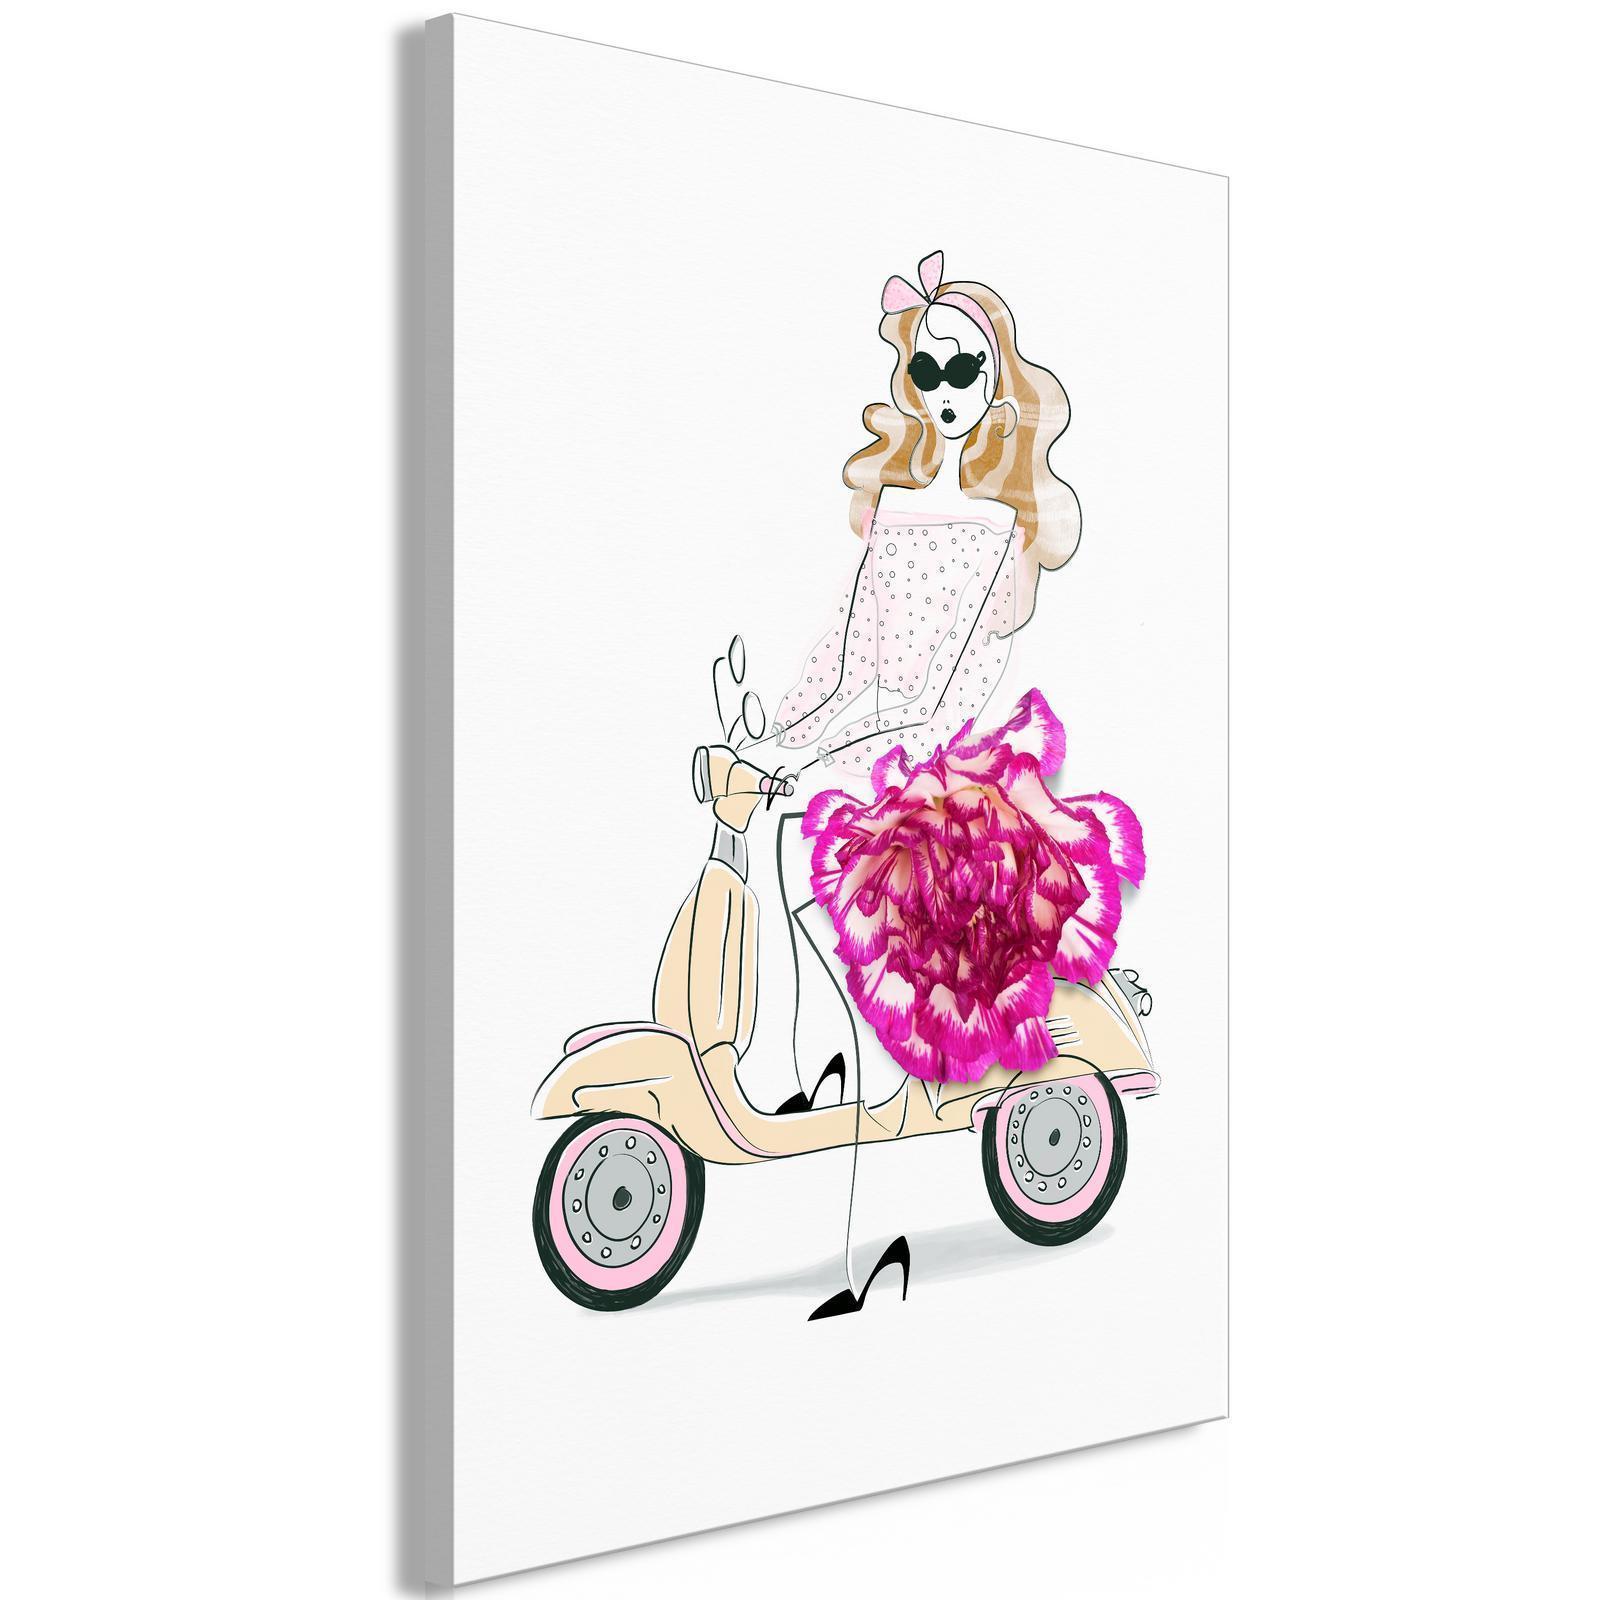 Tableau - Girl on a Scooter (1 Part) Vertical